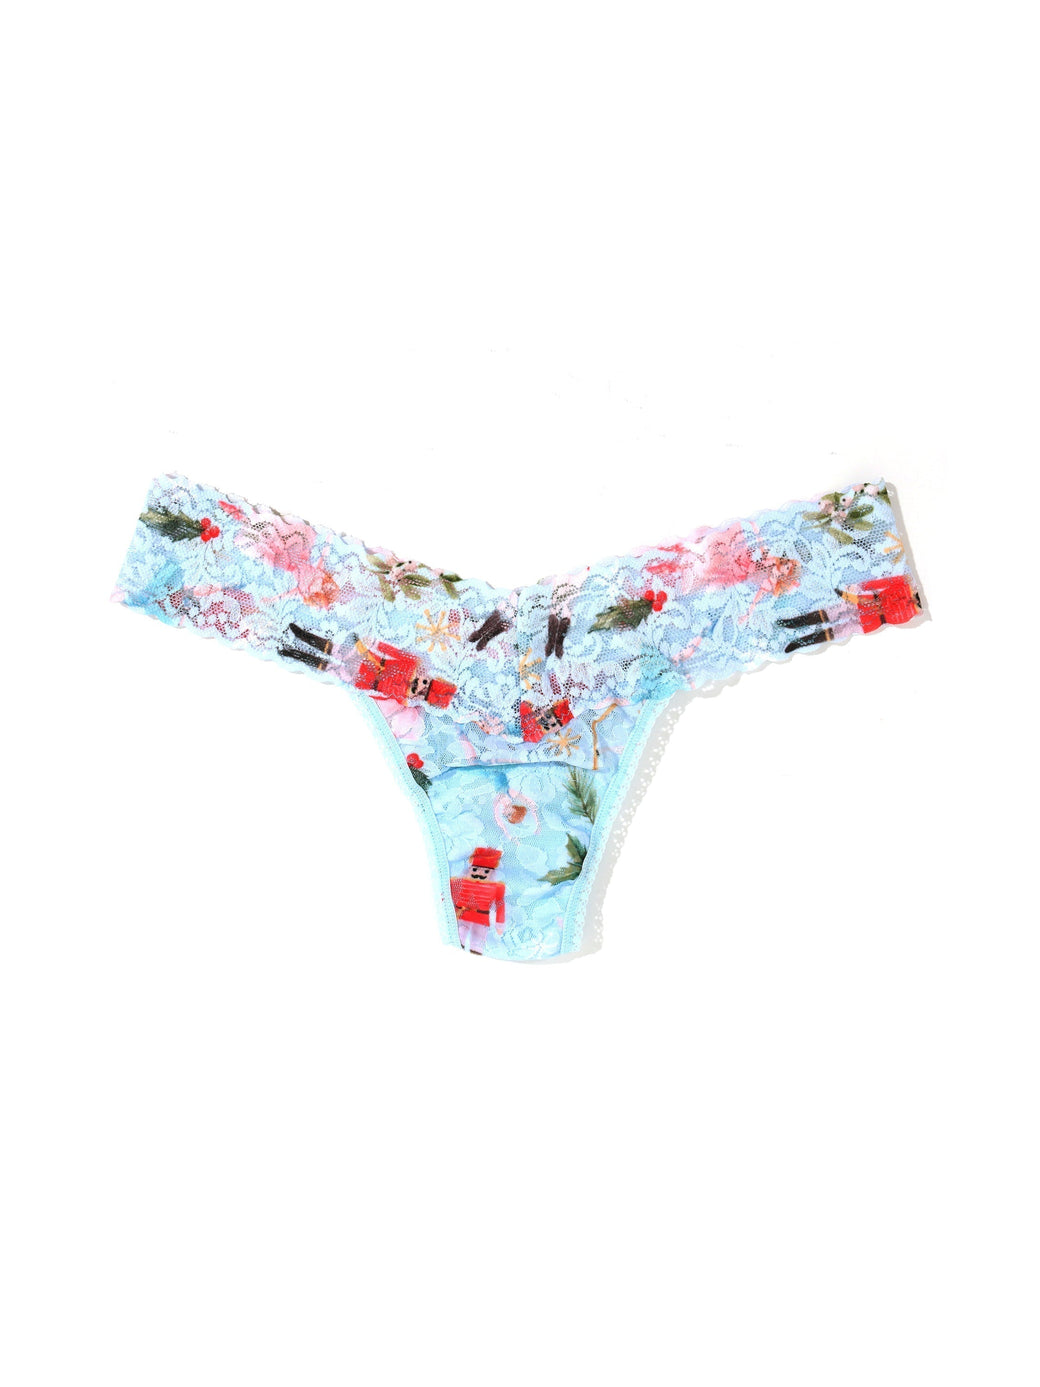 Printed Signature Lace Low Rise Thong Ballerina Dreaming Sale